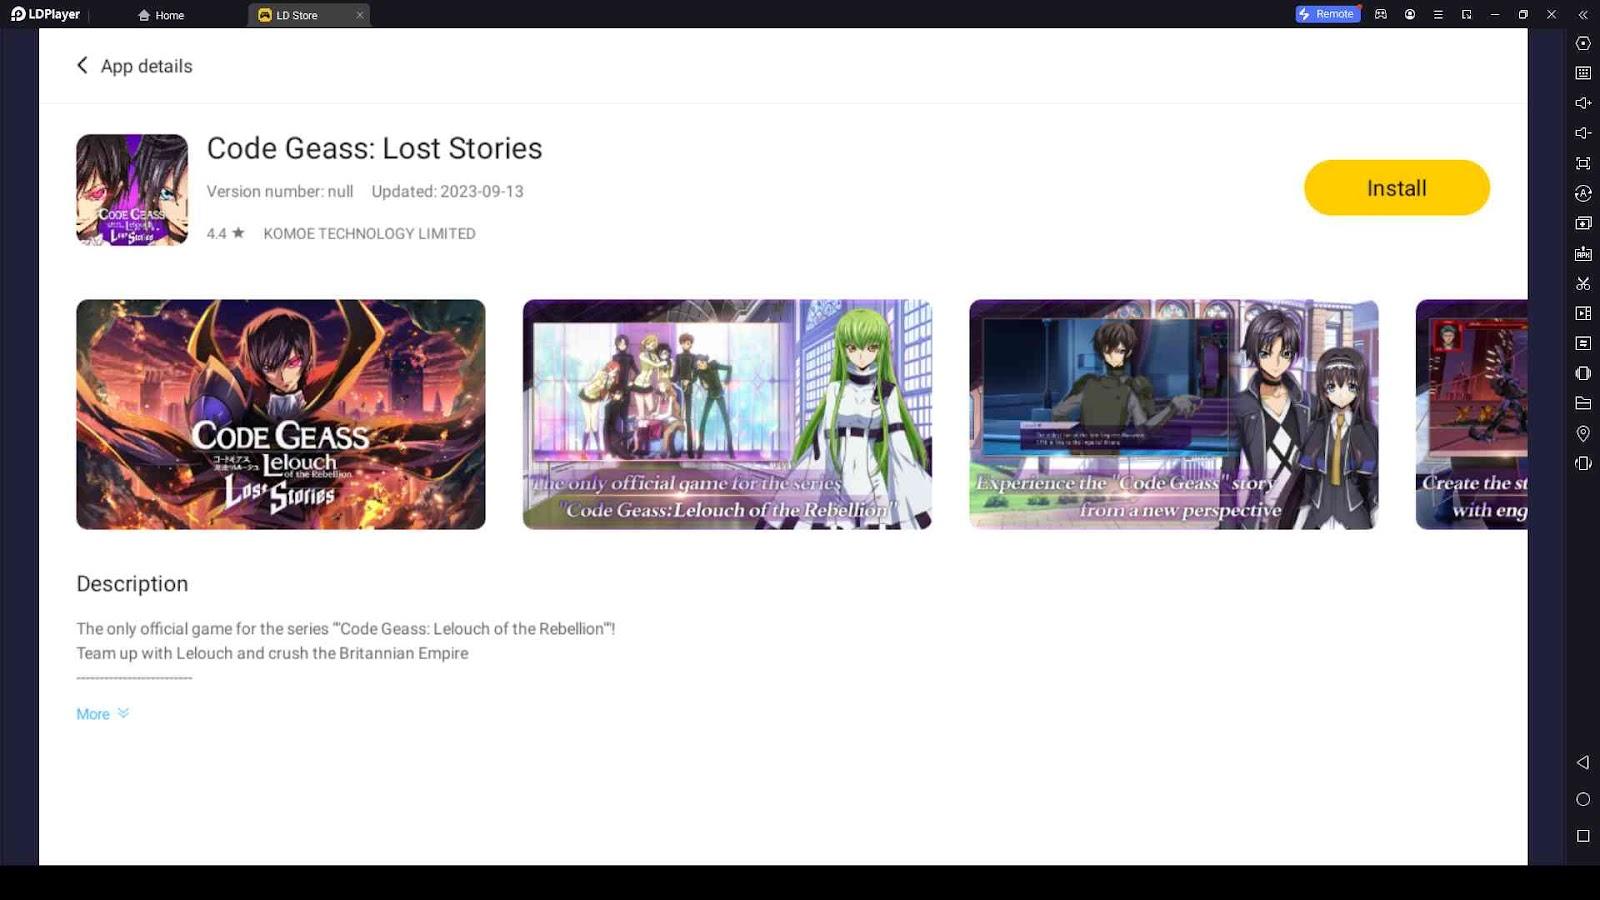 Making Code Geass: Lost Stories Reroll Easier with LDPlayer 9